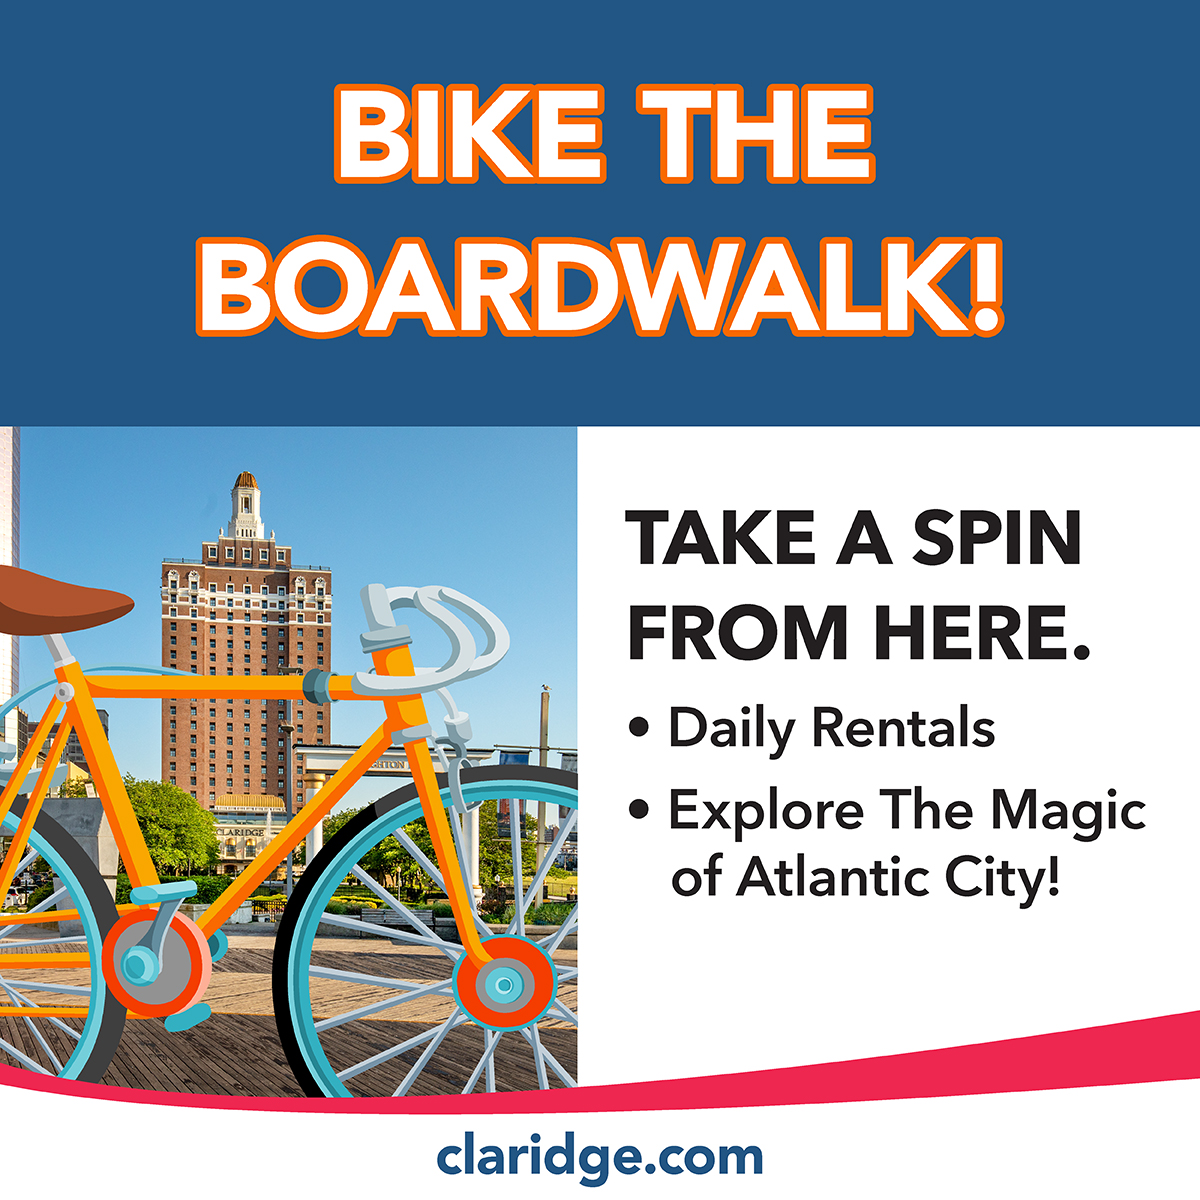 Enjoy the beautiful fall weather and explore the magic of Atlantic City! Daily bike rentals can be found right outside The Claridge for your riding pleasure 🚴‍♂️🚴‍♀️